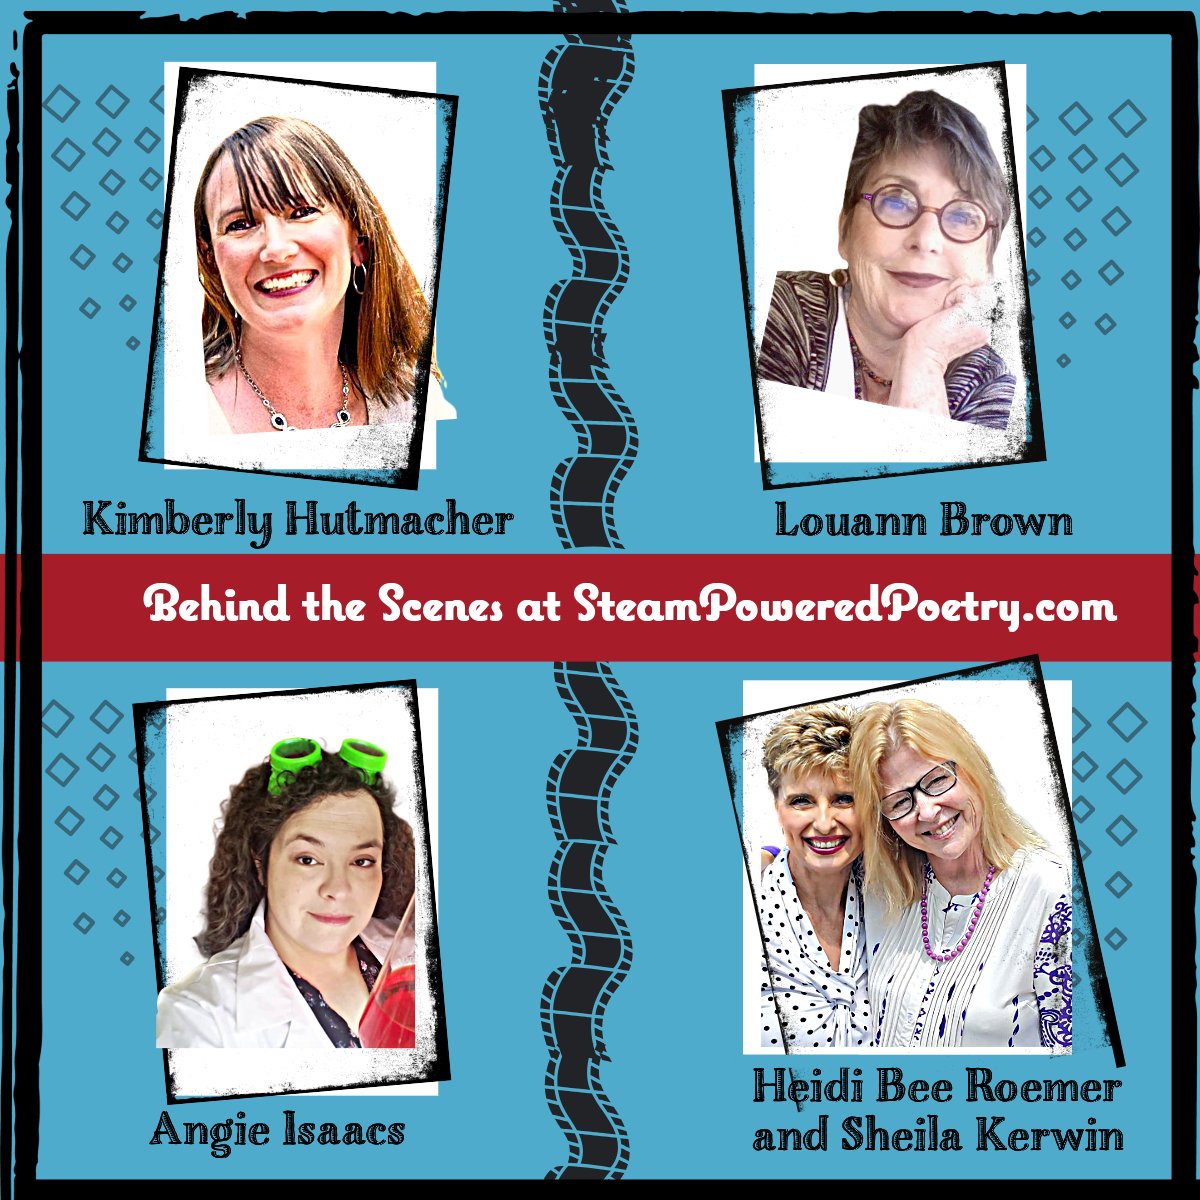 Meet my amazing STEAM-mates! KIM provides book & activity lists, LOUANN creates crafts, ANGIE keeps our site safe, and SHEILA hosts Wee Steamers, provides #teacher resources, and helps w/ promotions. Grateful!👉steampoweredpoetry.com/about/ #STEMeducation #TEACHers